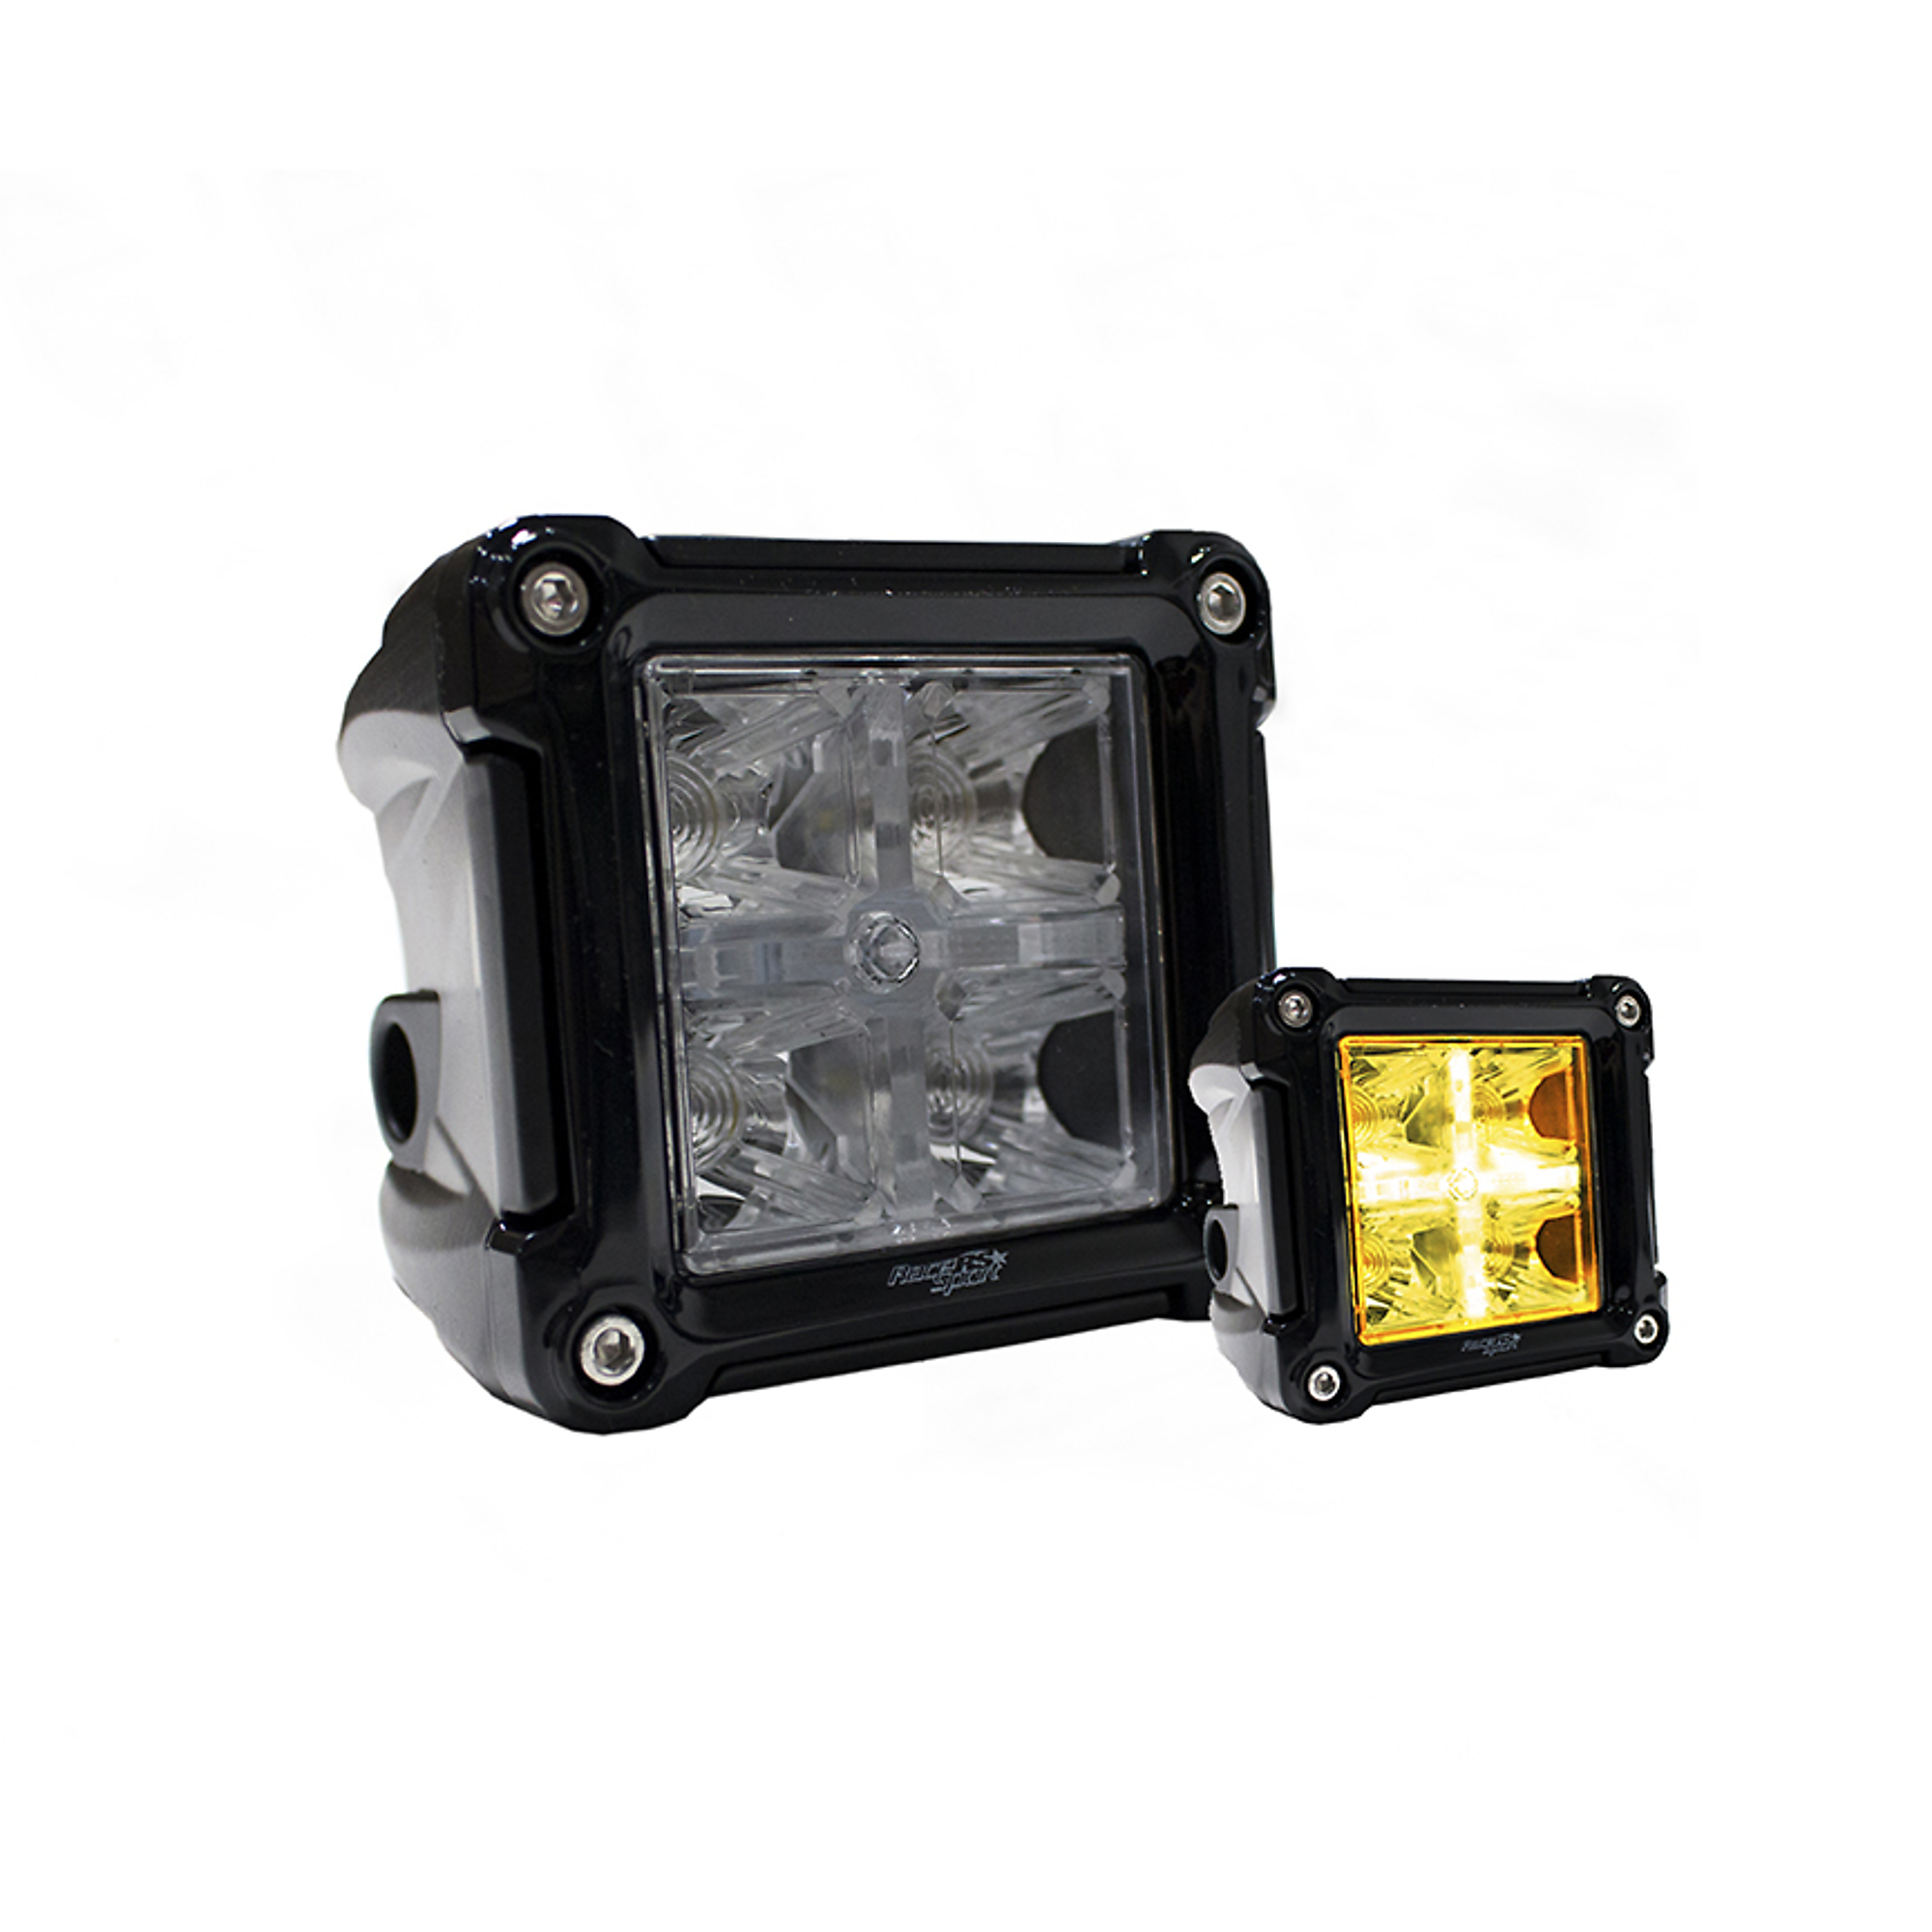 Race Sport Lighting, 3x3Inch Cube Style LED Spot Light Front Whit/Amber, Light Type LED, Lens Color Clear, Included (qty.) 1 Model 1004888